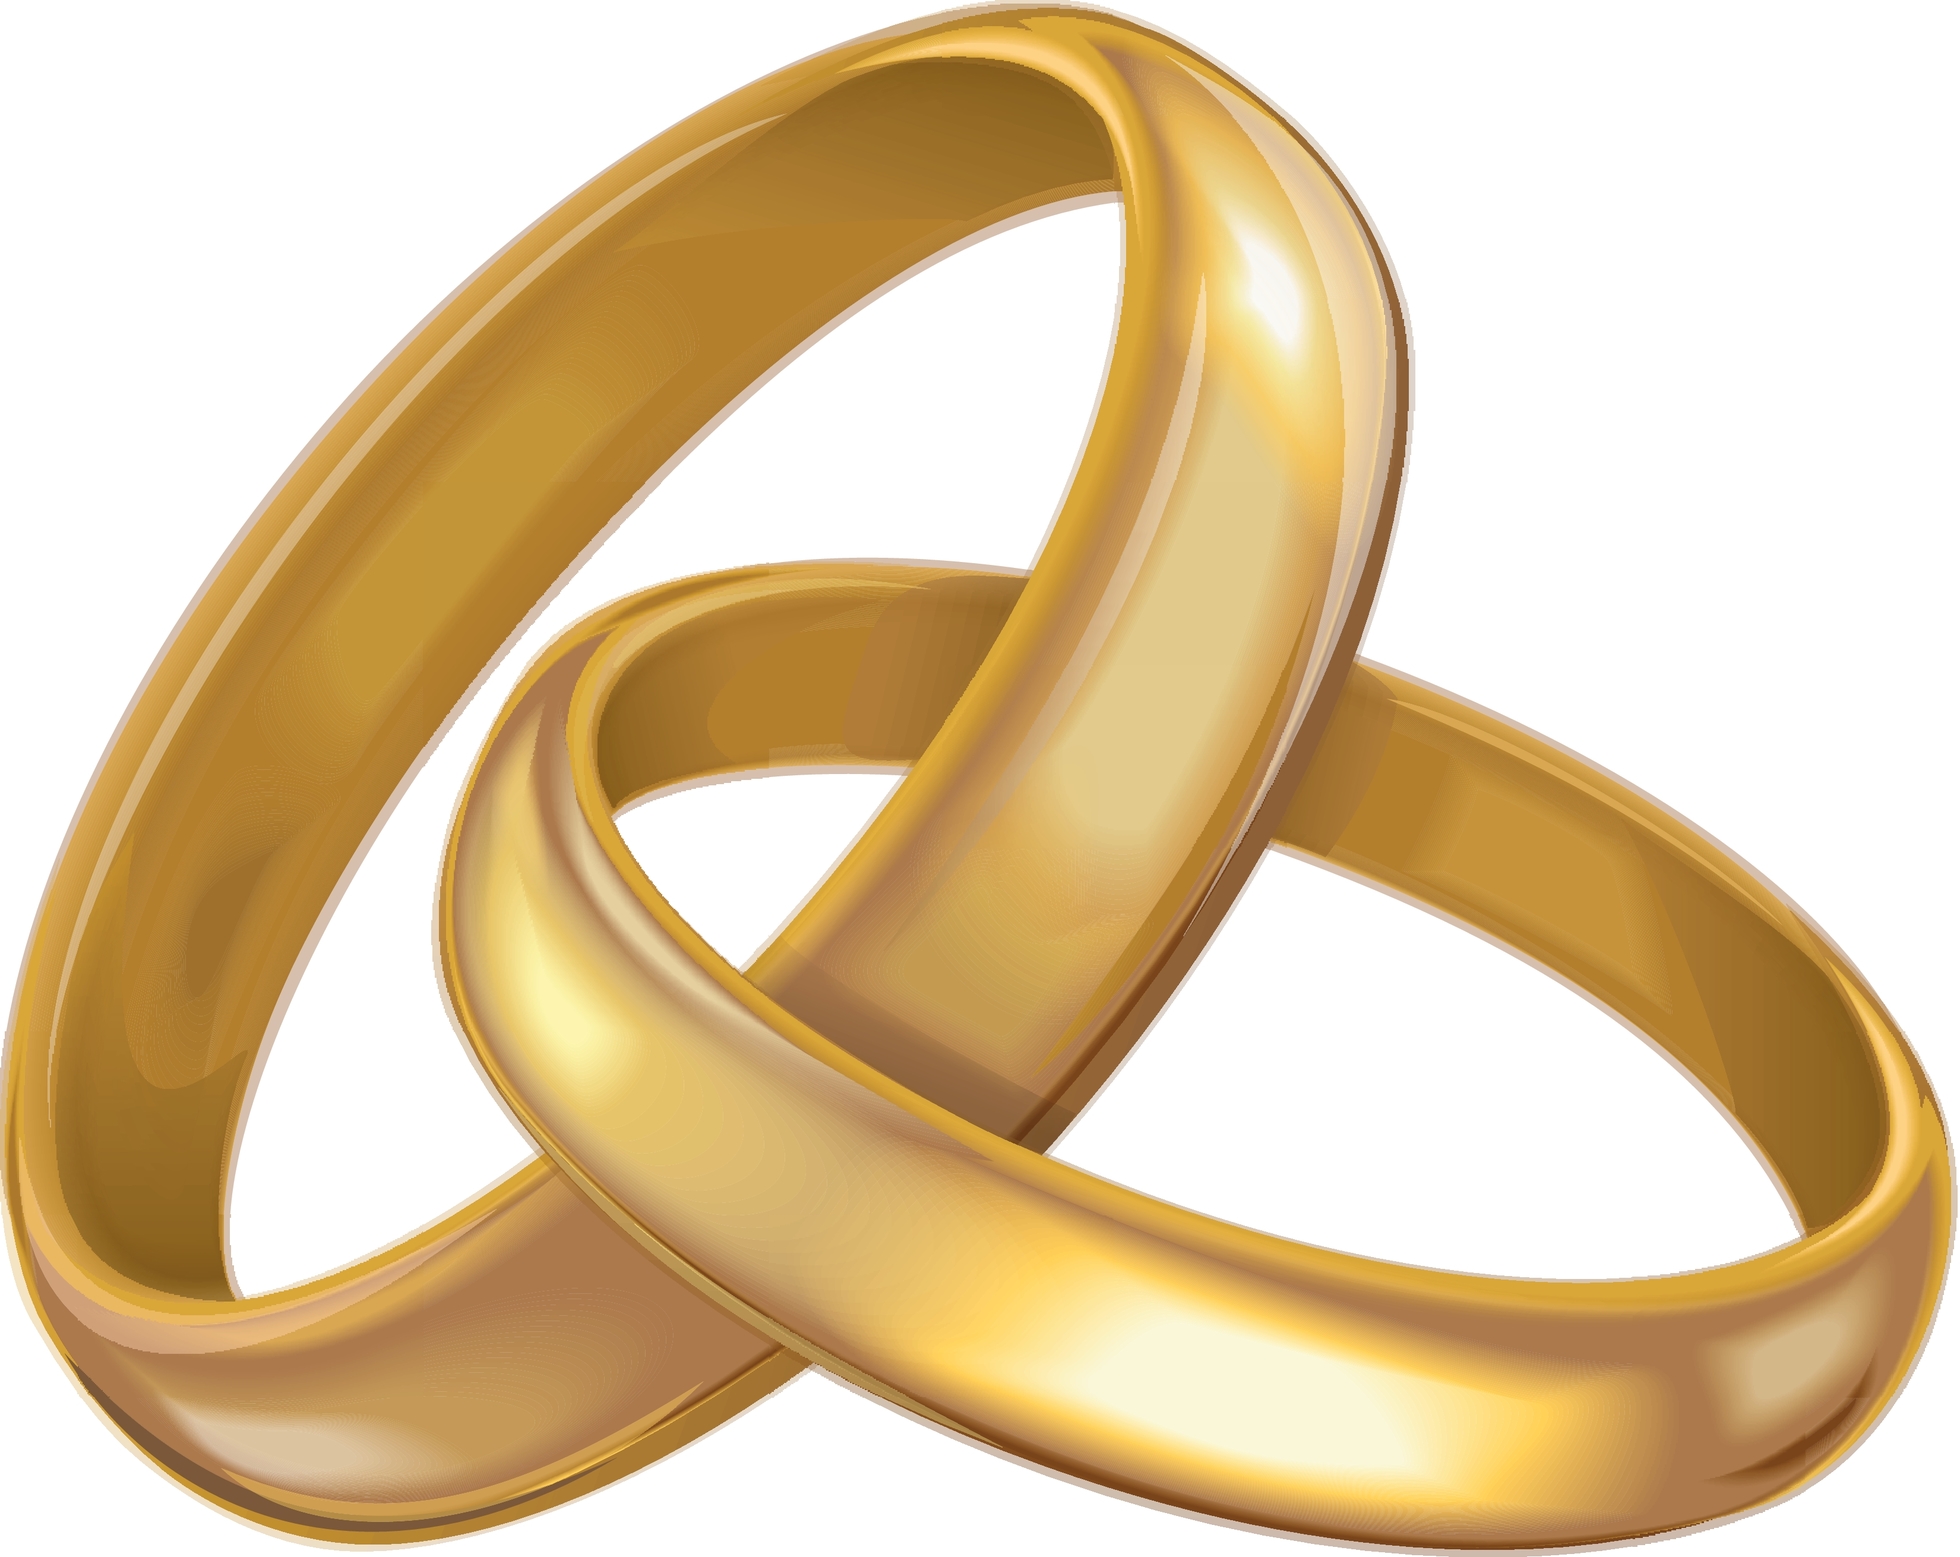 Intertwined Wedding Rings Png & Free Intertwined Wedding.